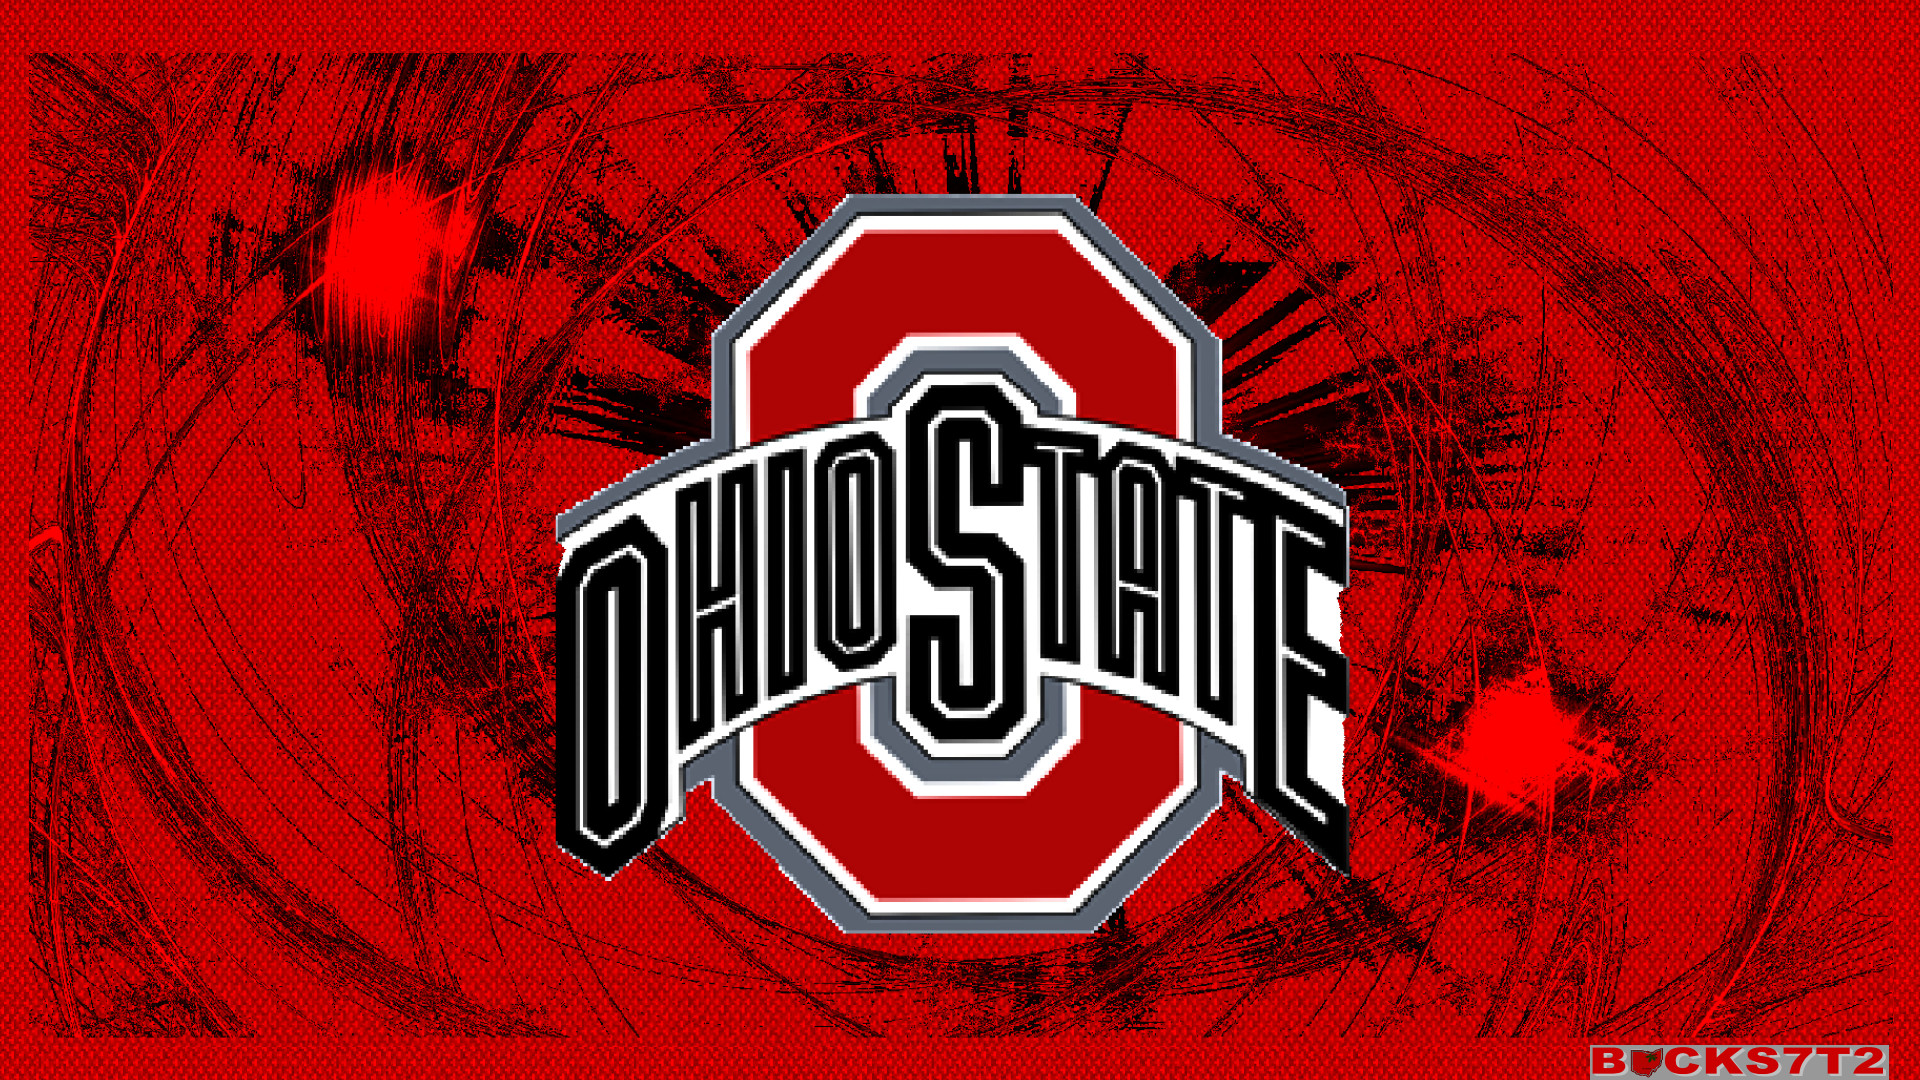 1920x1080 Ohio State Buckeyes images RED BLOCK O OHIO STATE HD wallpaper and  background photos